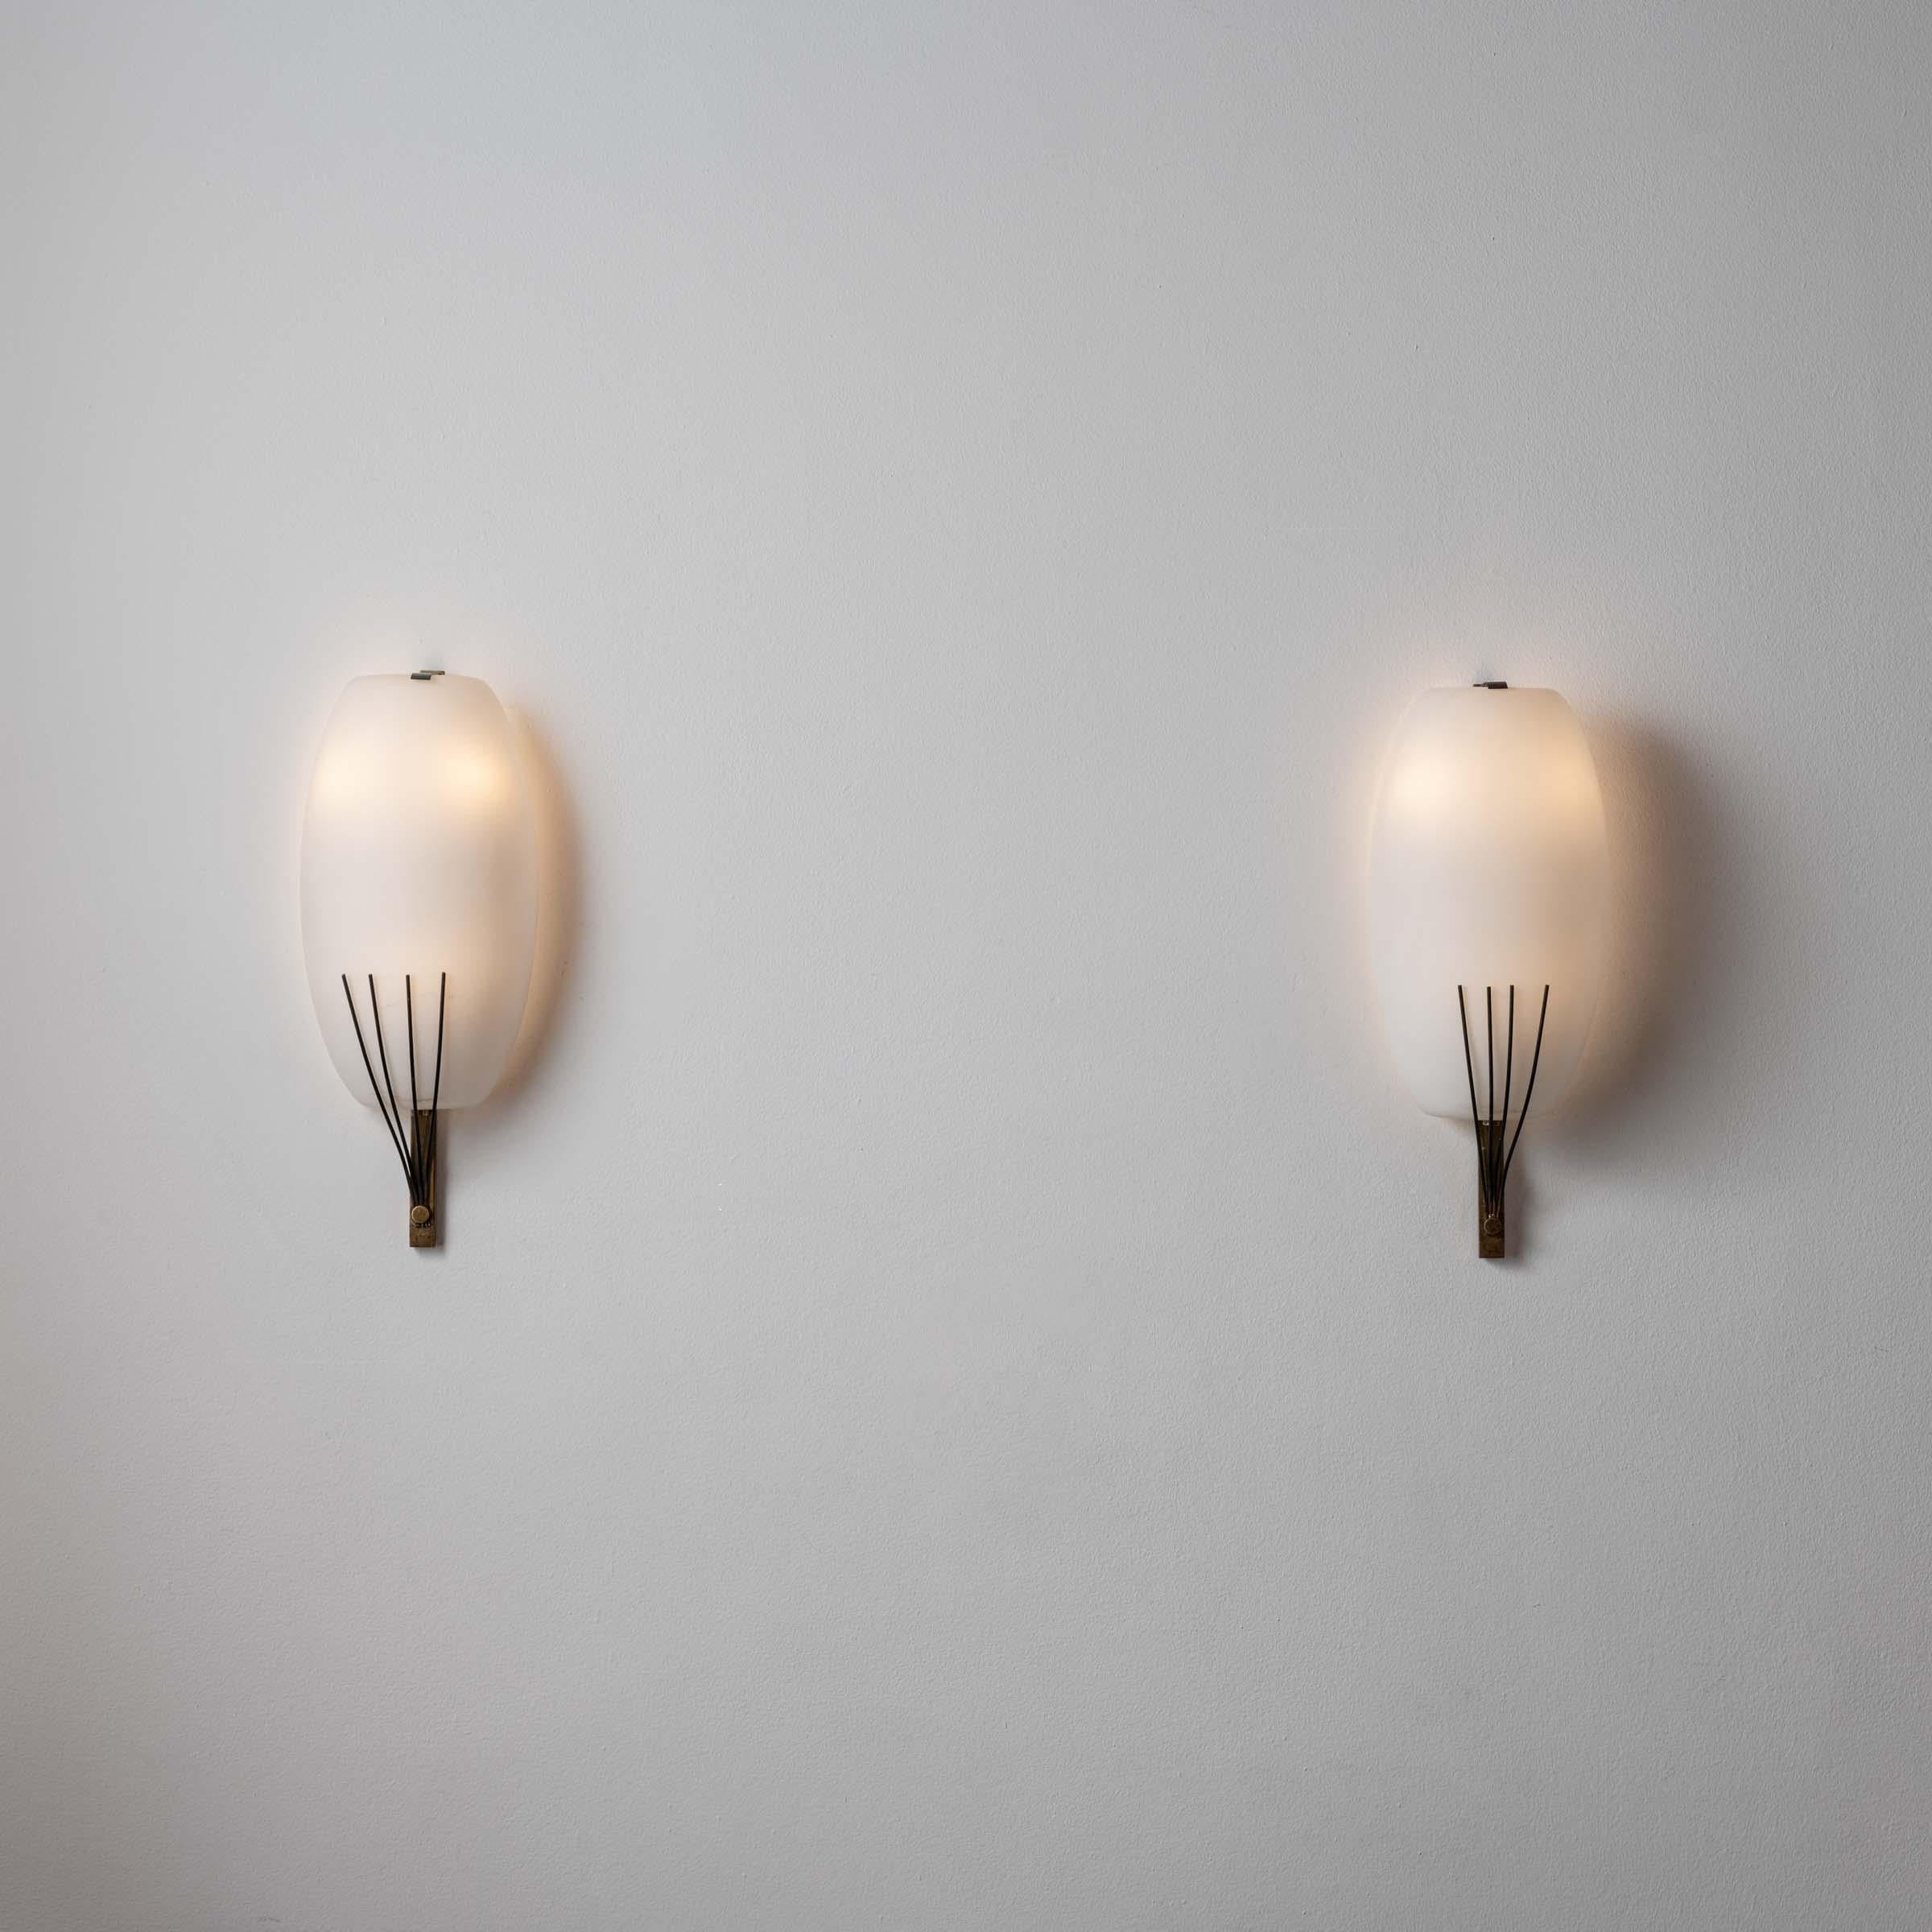 Pair of Sconces by Stilnovo. Designed and manufactured in Italy, circa 1950's. Brushed satin glass, brass. Custom brass backplates. Wired for U.S. standards. We recommend three E14 candelabra 25w maximum bulbs per sconce. Bulbs not included.